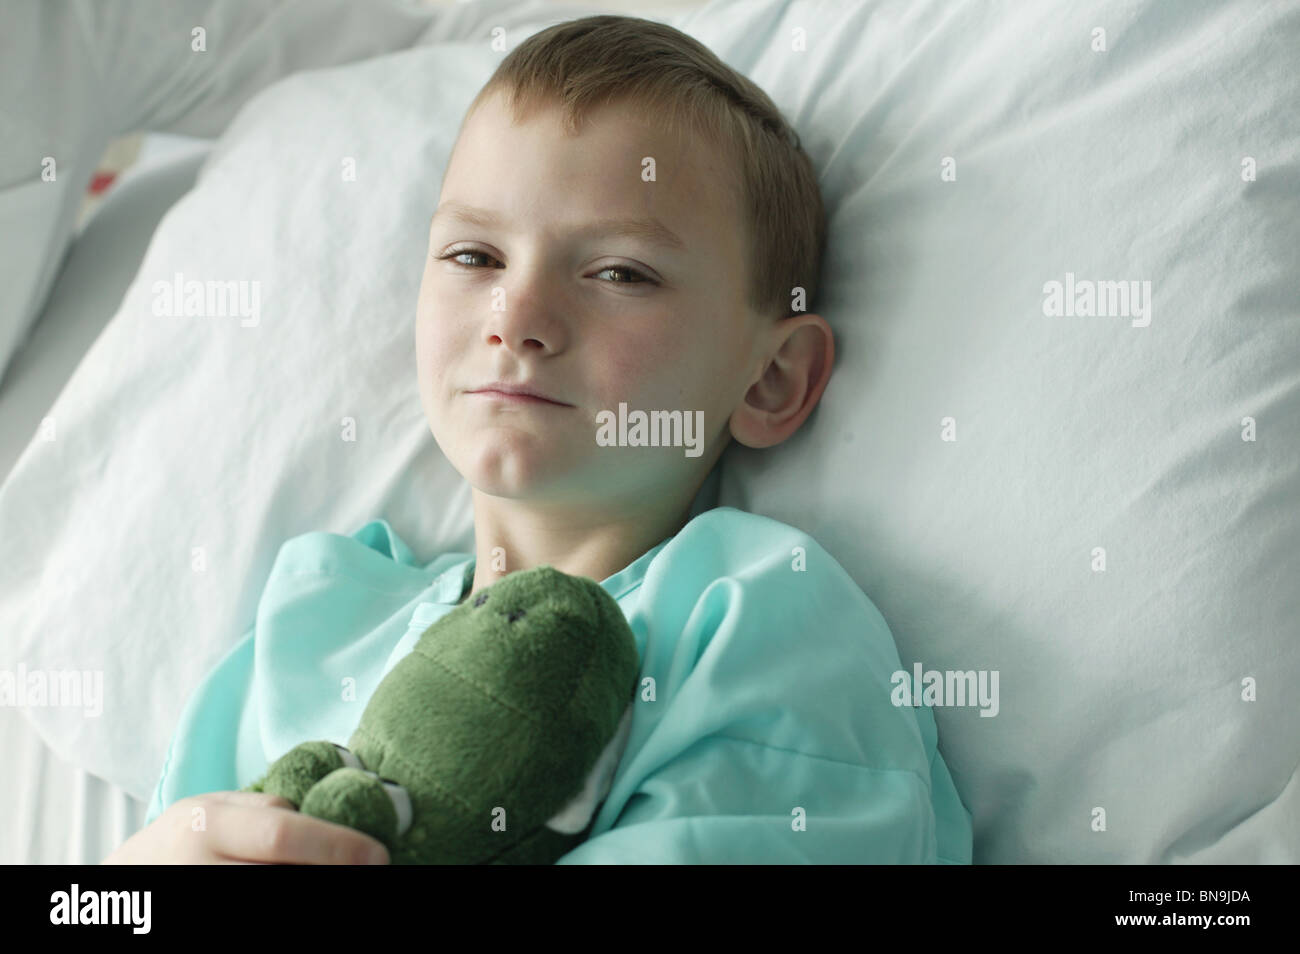 Young boy in hospital bed Banque D'Images